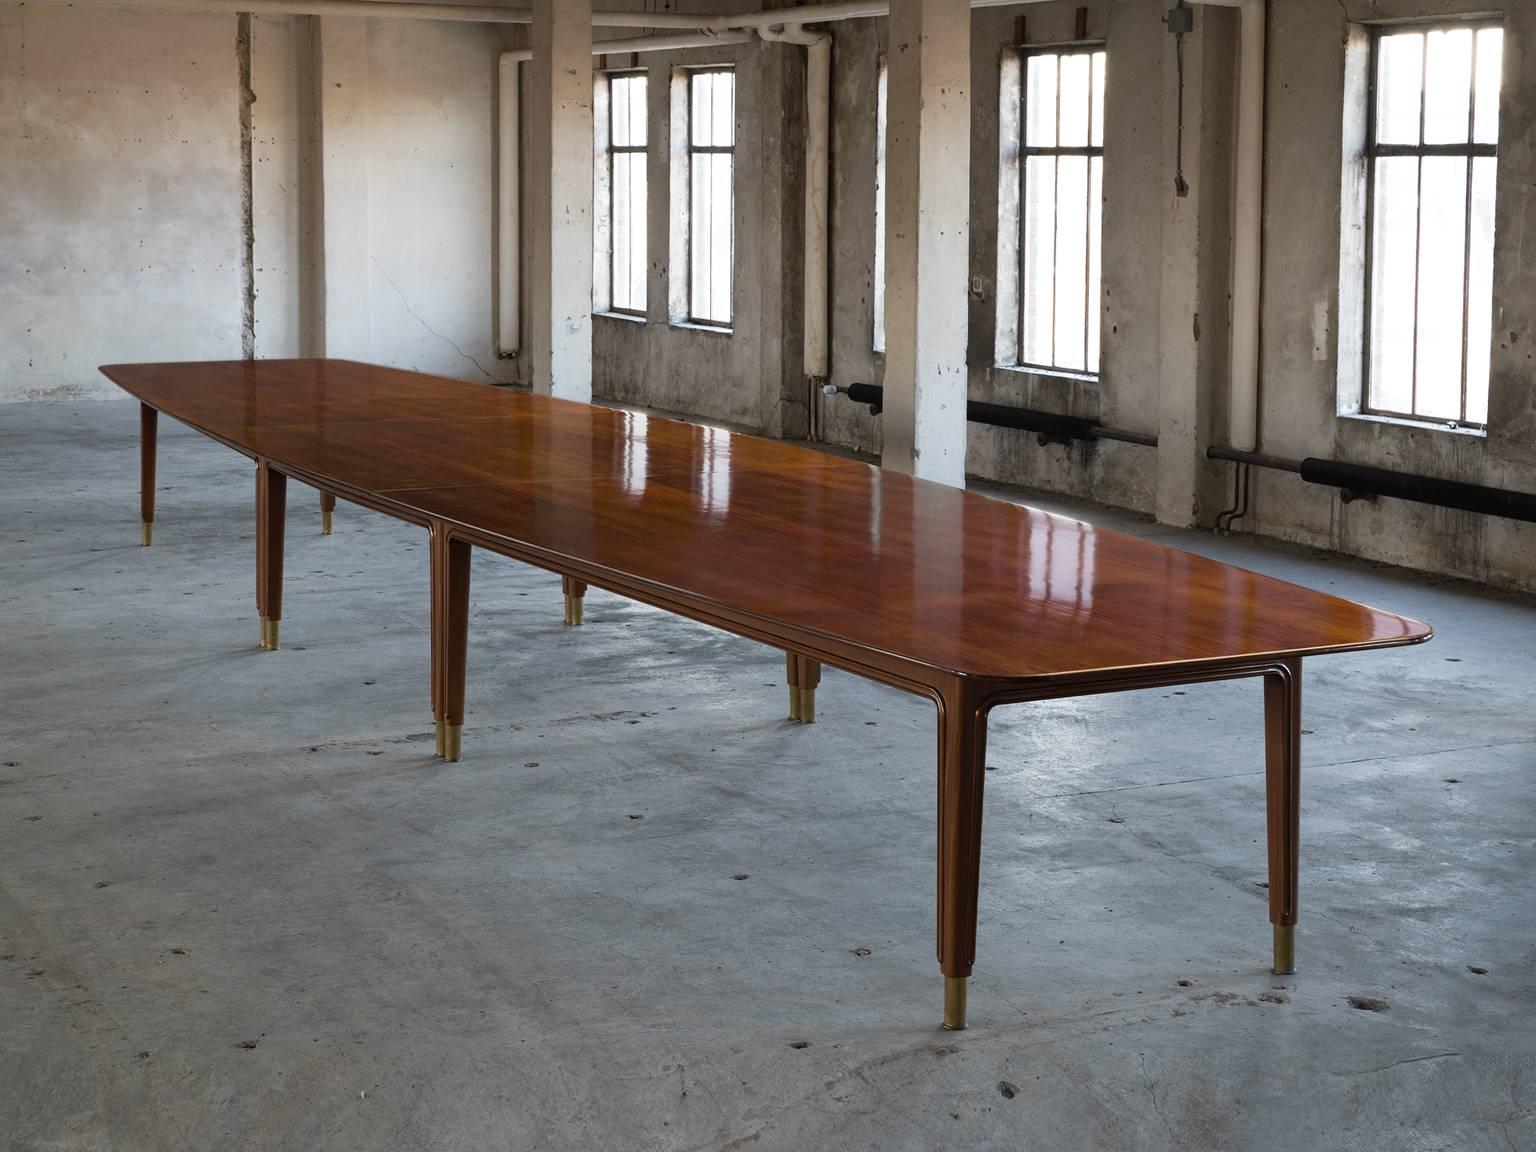 Conference table, in mahogany and brass, Denmark, 1950s.

Unique dining table made for a corporate commission in Denmark. This large table was specially designed and manufactured for the board of a Danish company. The legs are beautifully sculpted